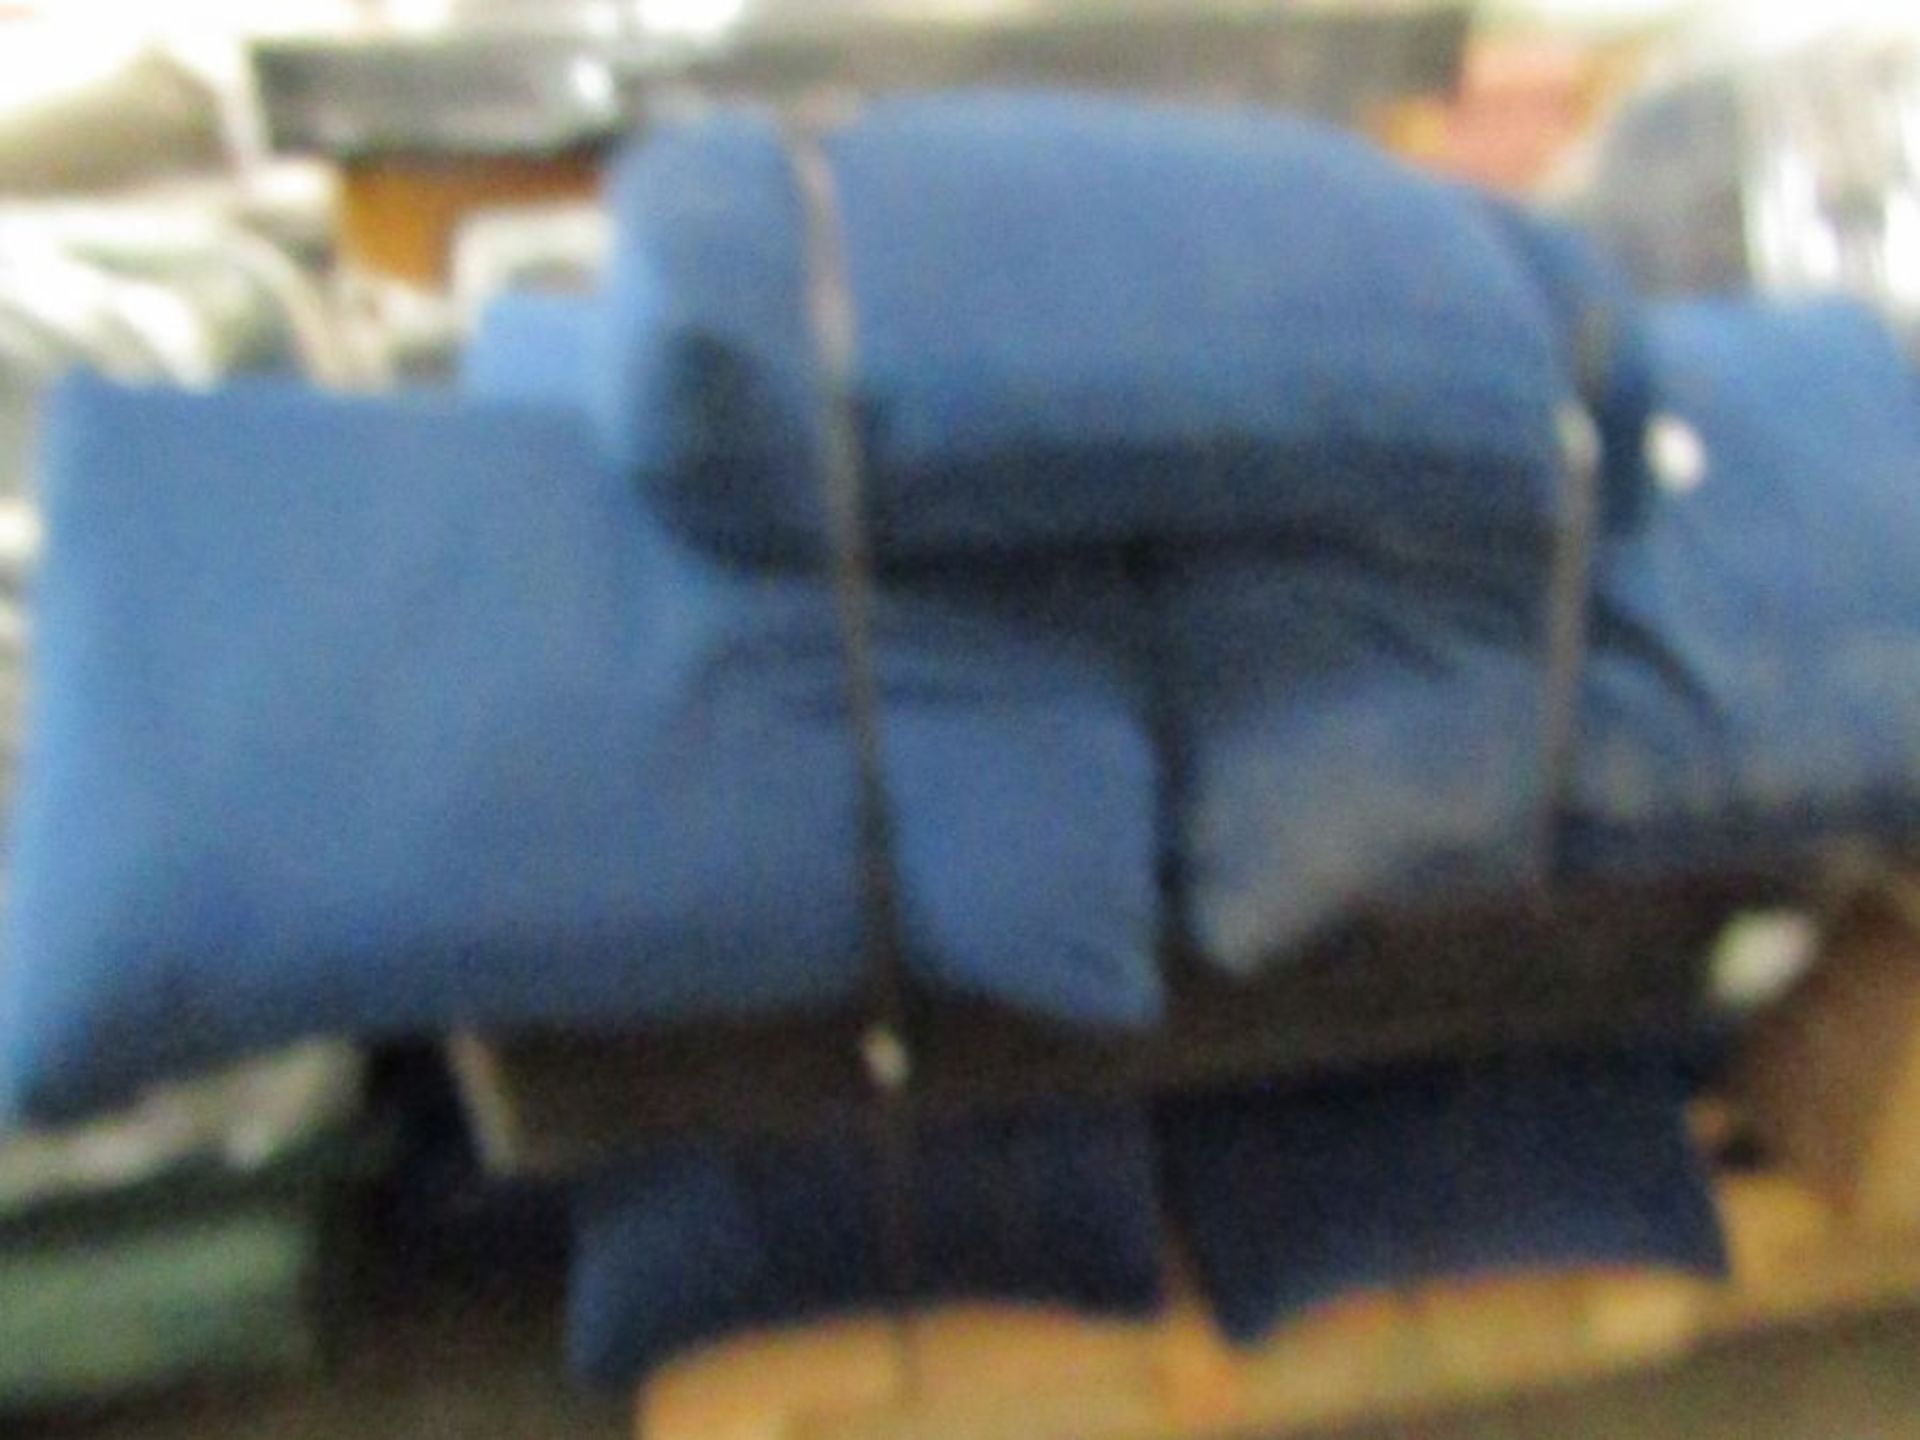 0% Buyers Premium, 24 Pallets of Genuine SNUG SOFA parts - Mixed Lots of Bases Backs Arms Cushions - Image 4 of 16